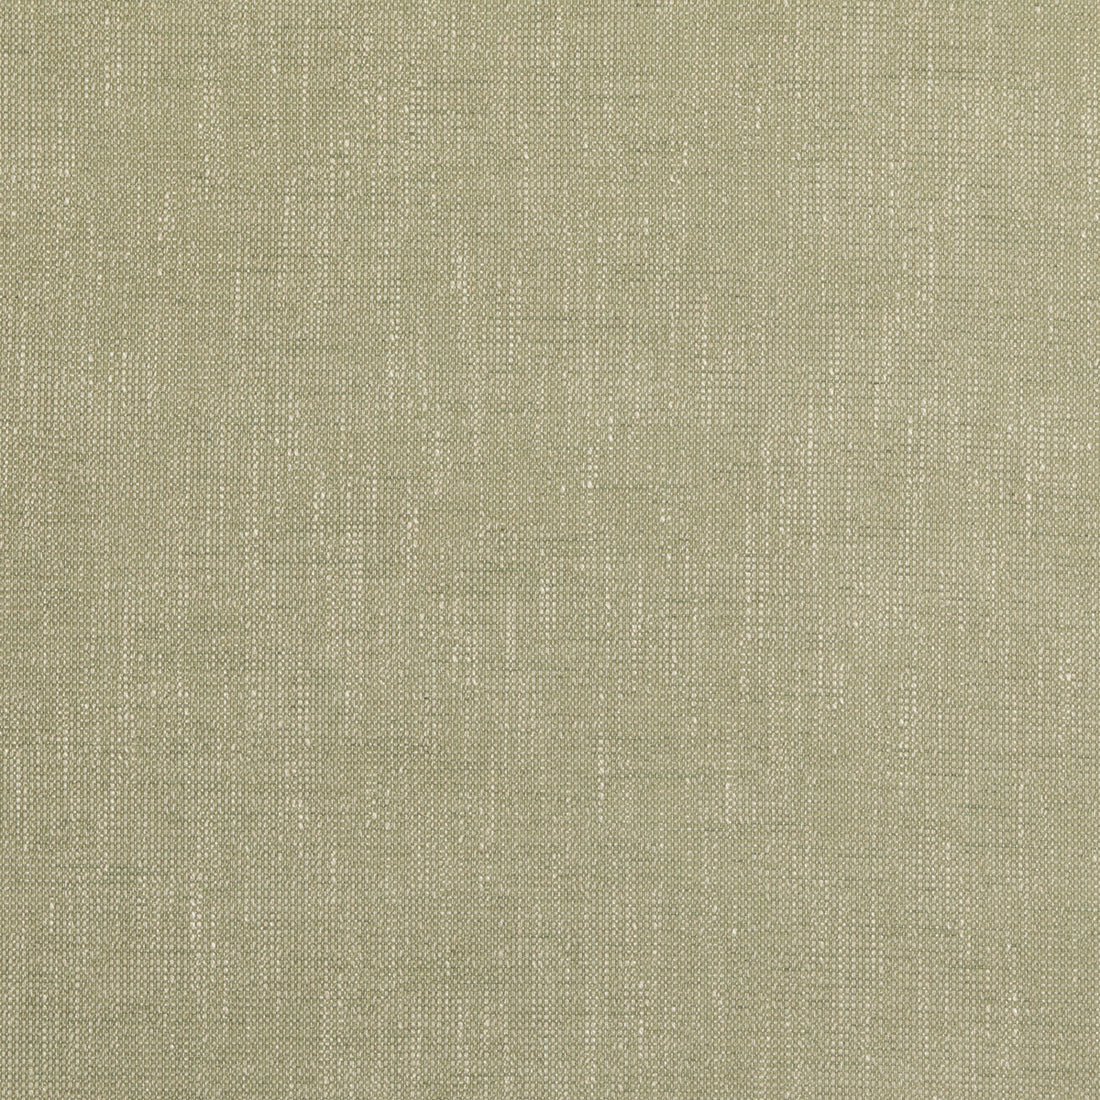 Bower fabric in green color - pattern PF50489.735.0 - by Baker Lifestyle in the Block Weaves collection